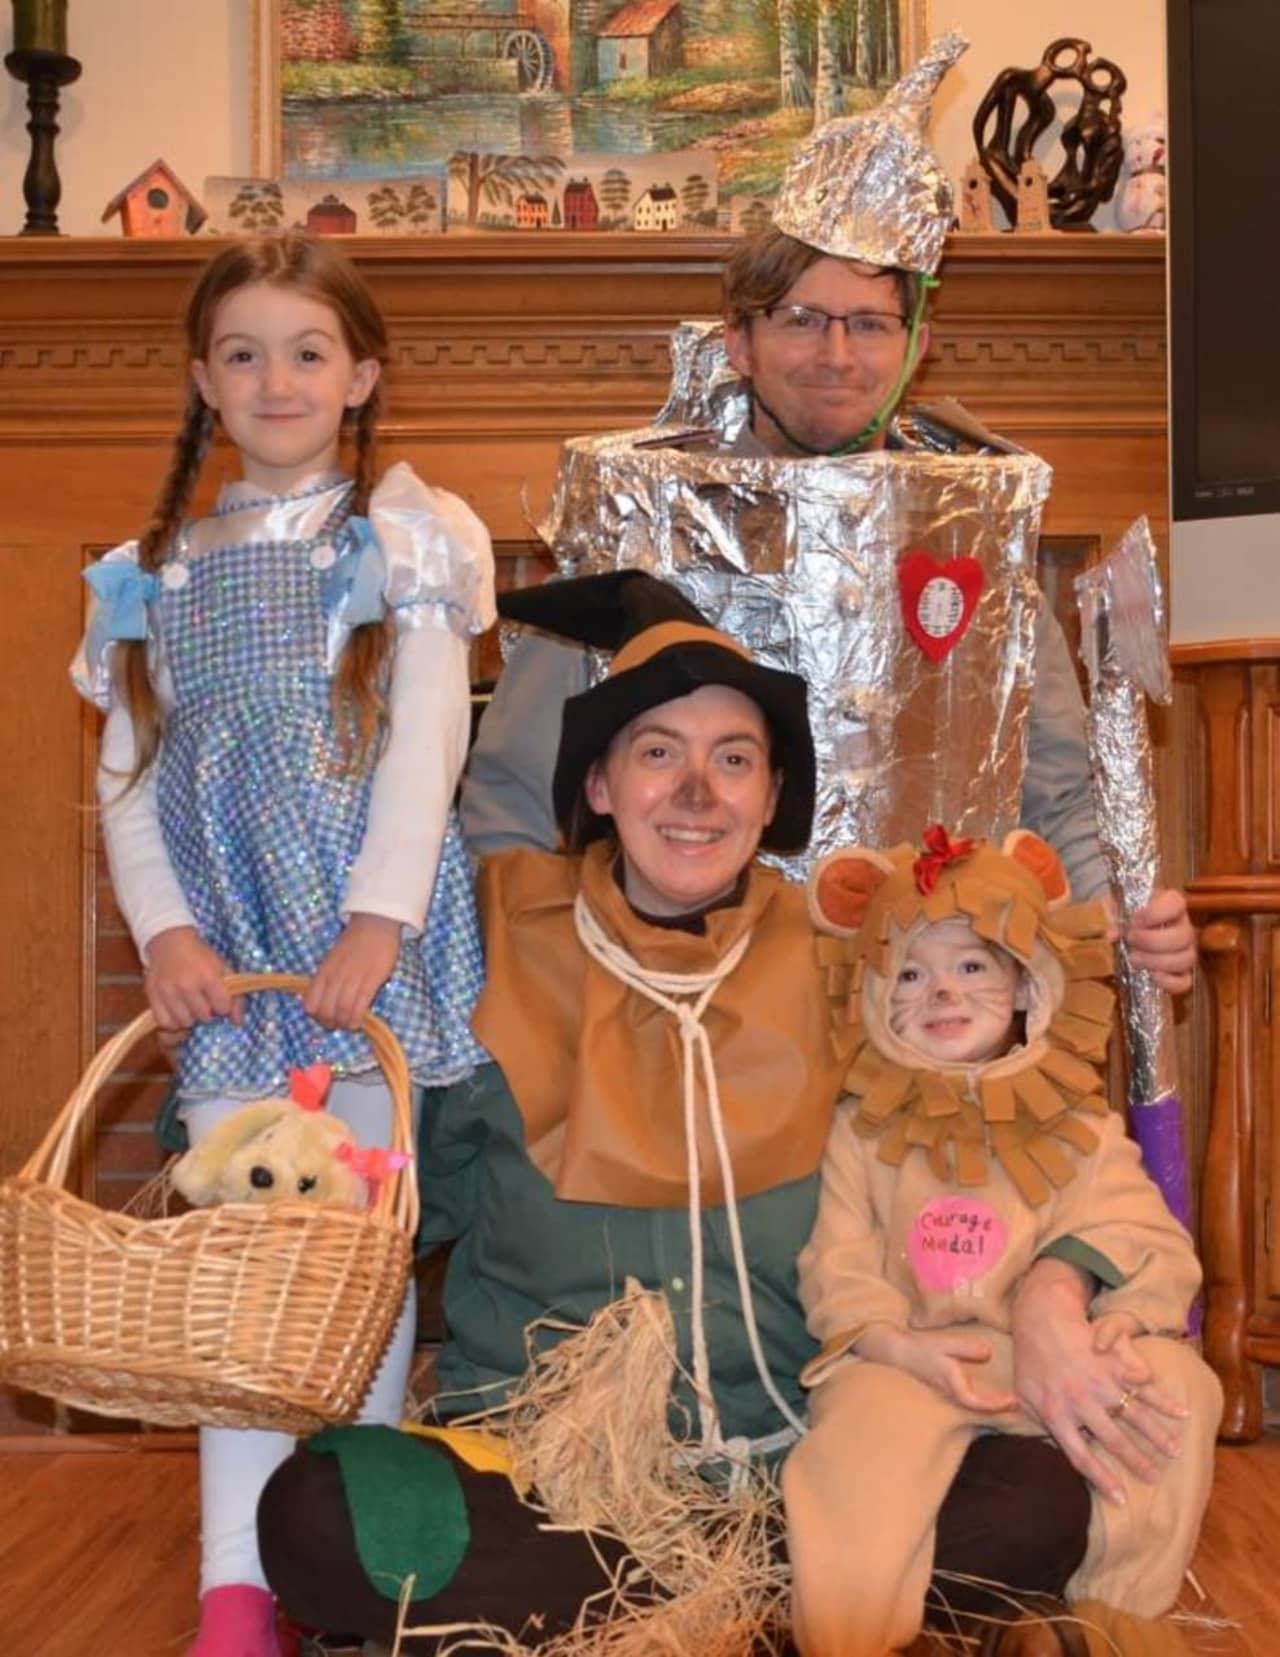 Robert and Cara Hughes and their daughters dress up as characters from "The Wizard of Oz" in a bid to win a trip to Scotland from the "Today" show.